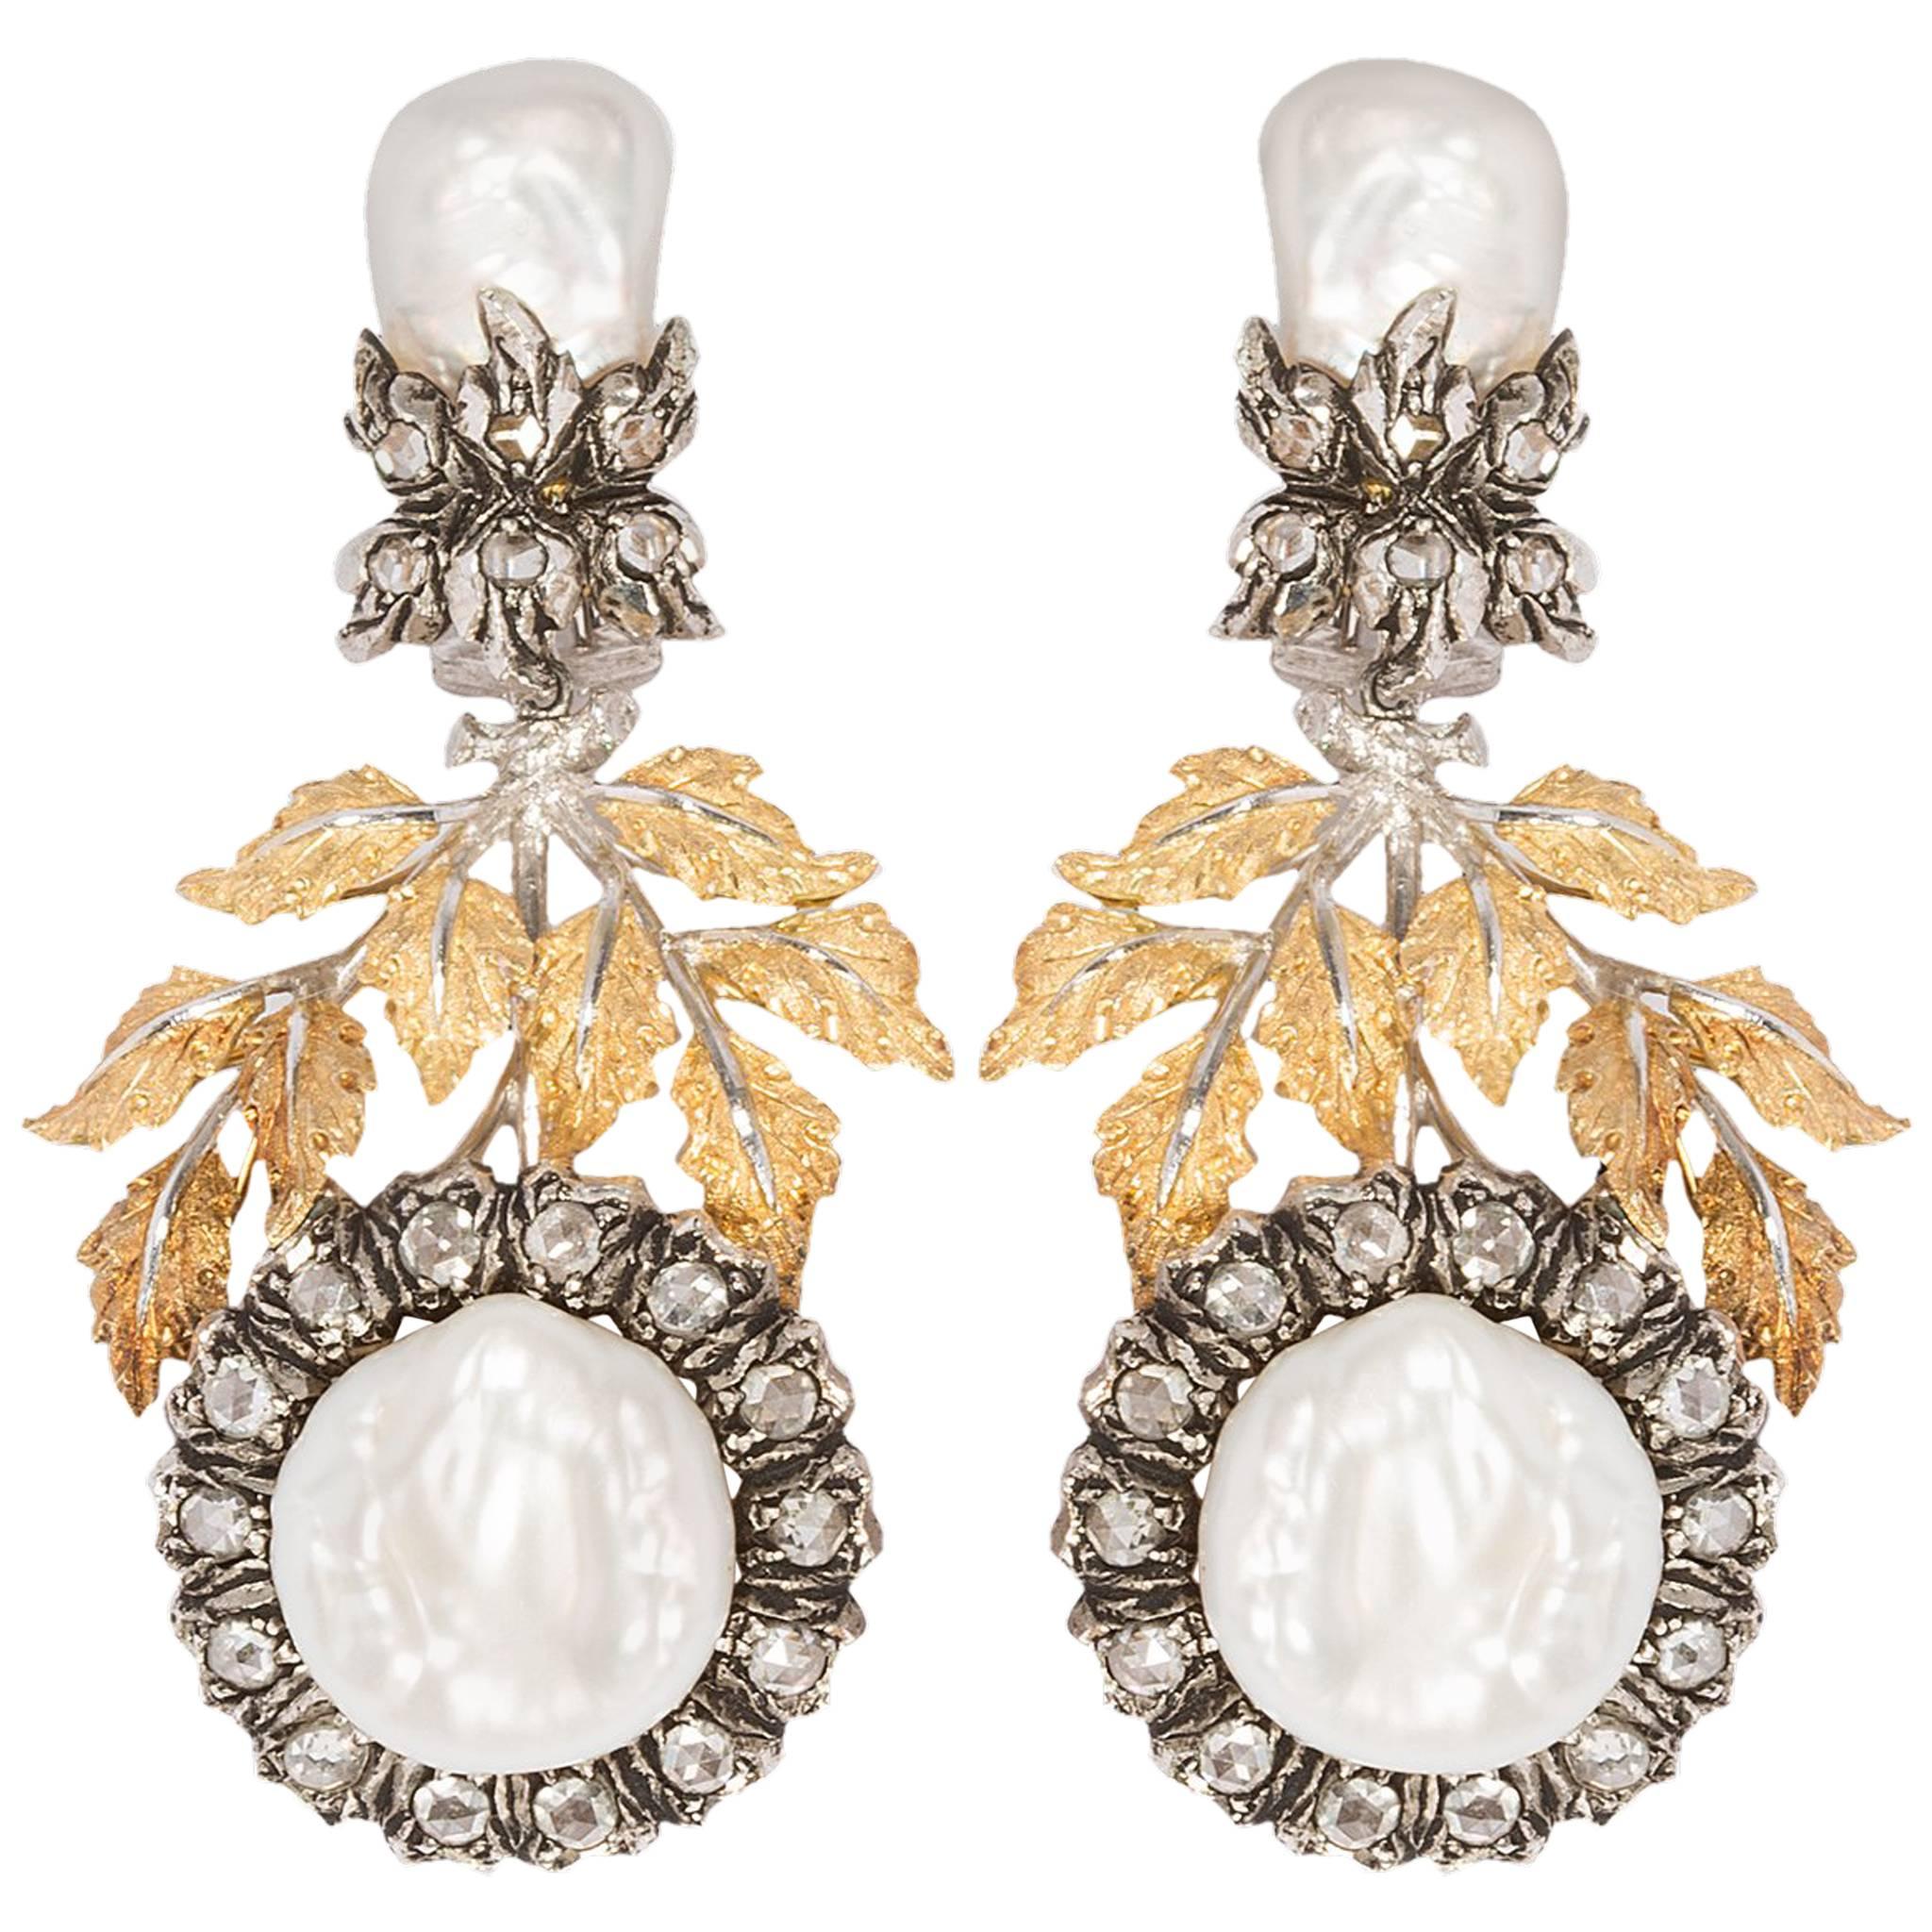 Buccellati Gianmaria 18 Carat Gold, Baroque Pearls and Mother-of-Pearl Earrings